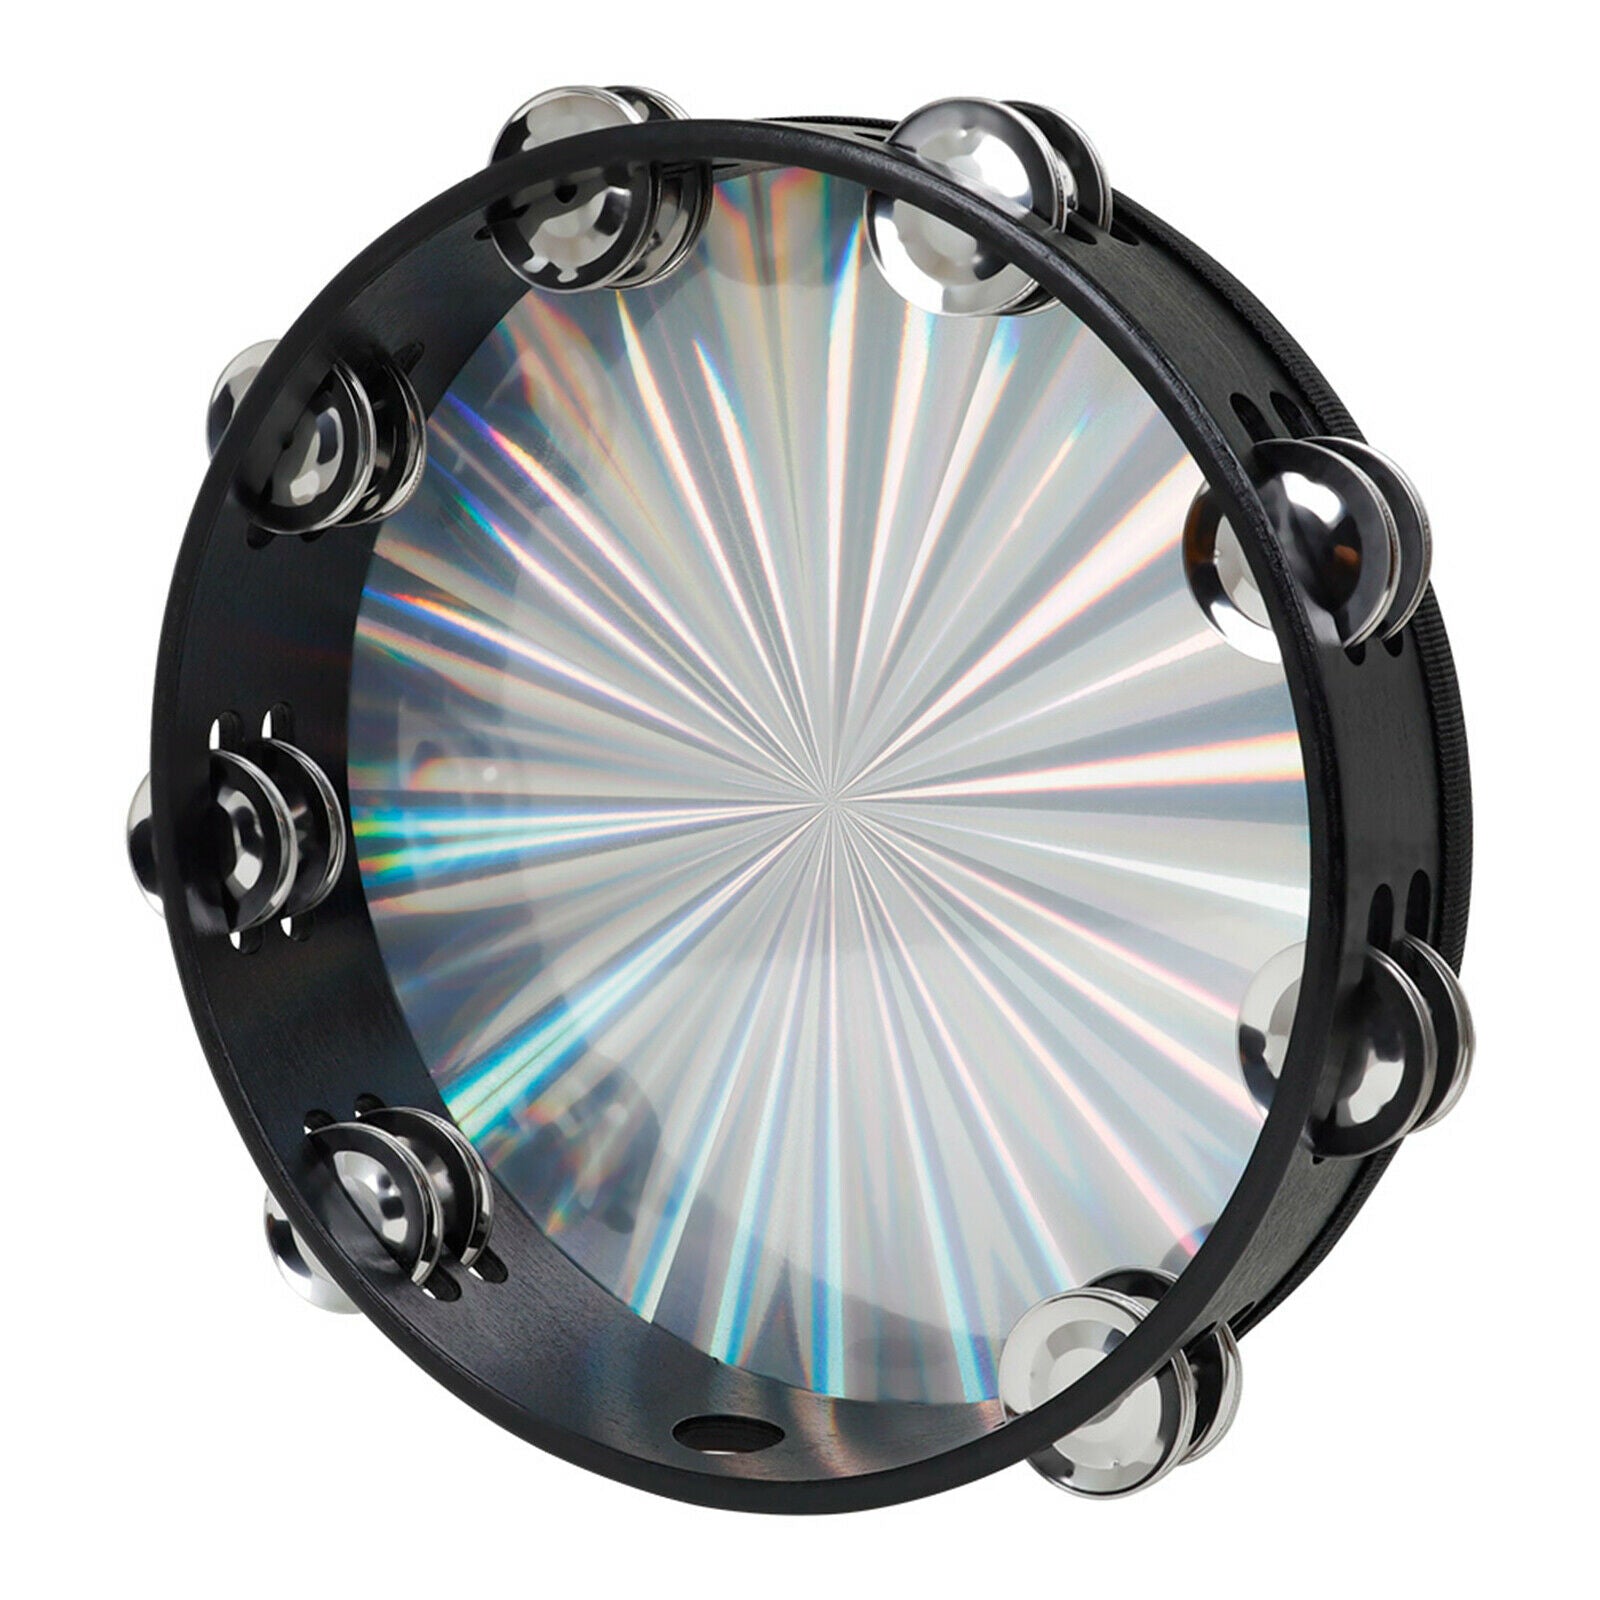 New 10" Reflective Double Row Jingle Percussion Tambourine for Church Band